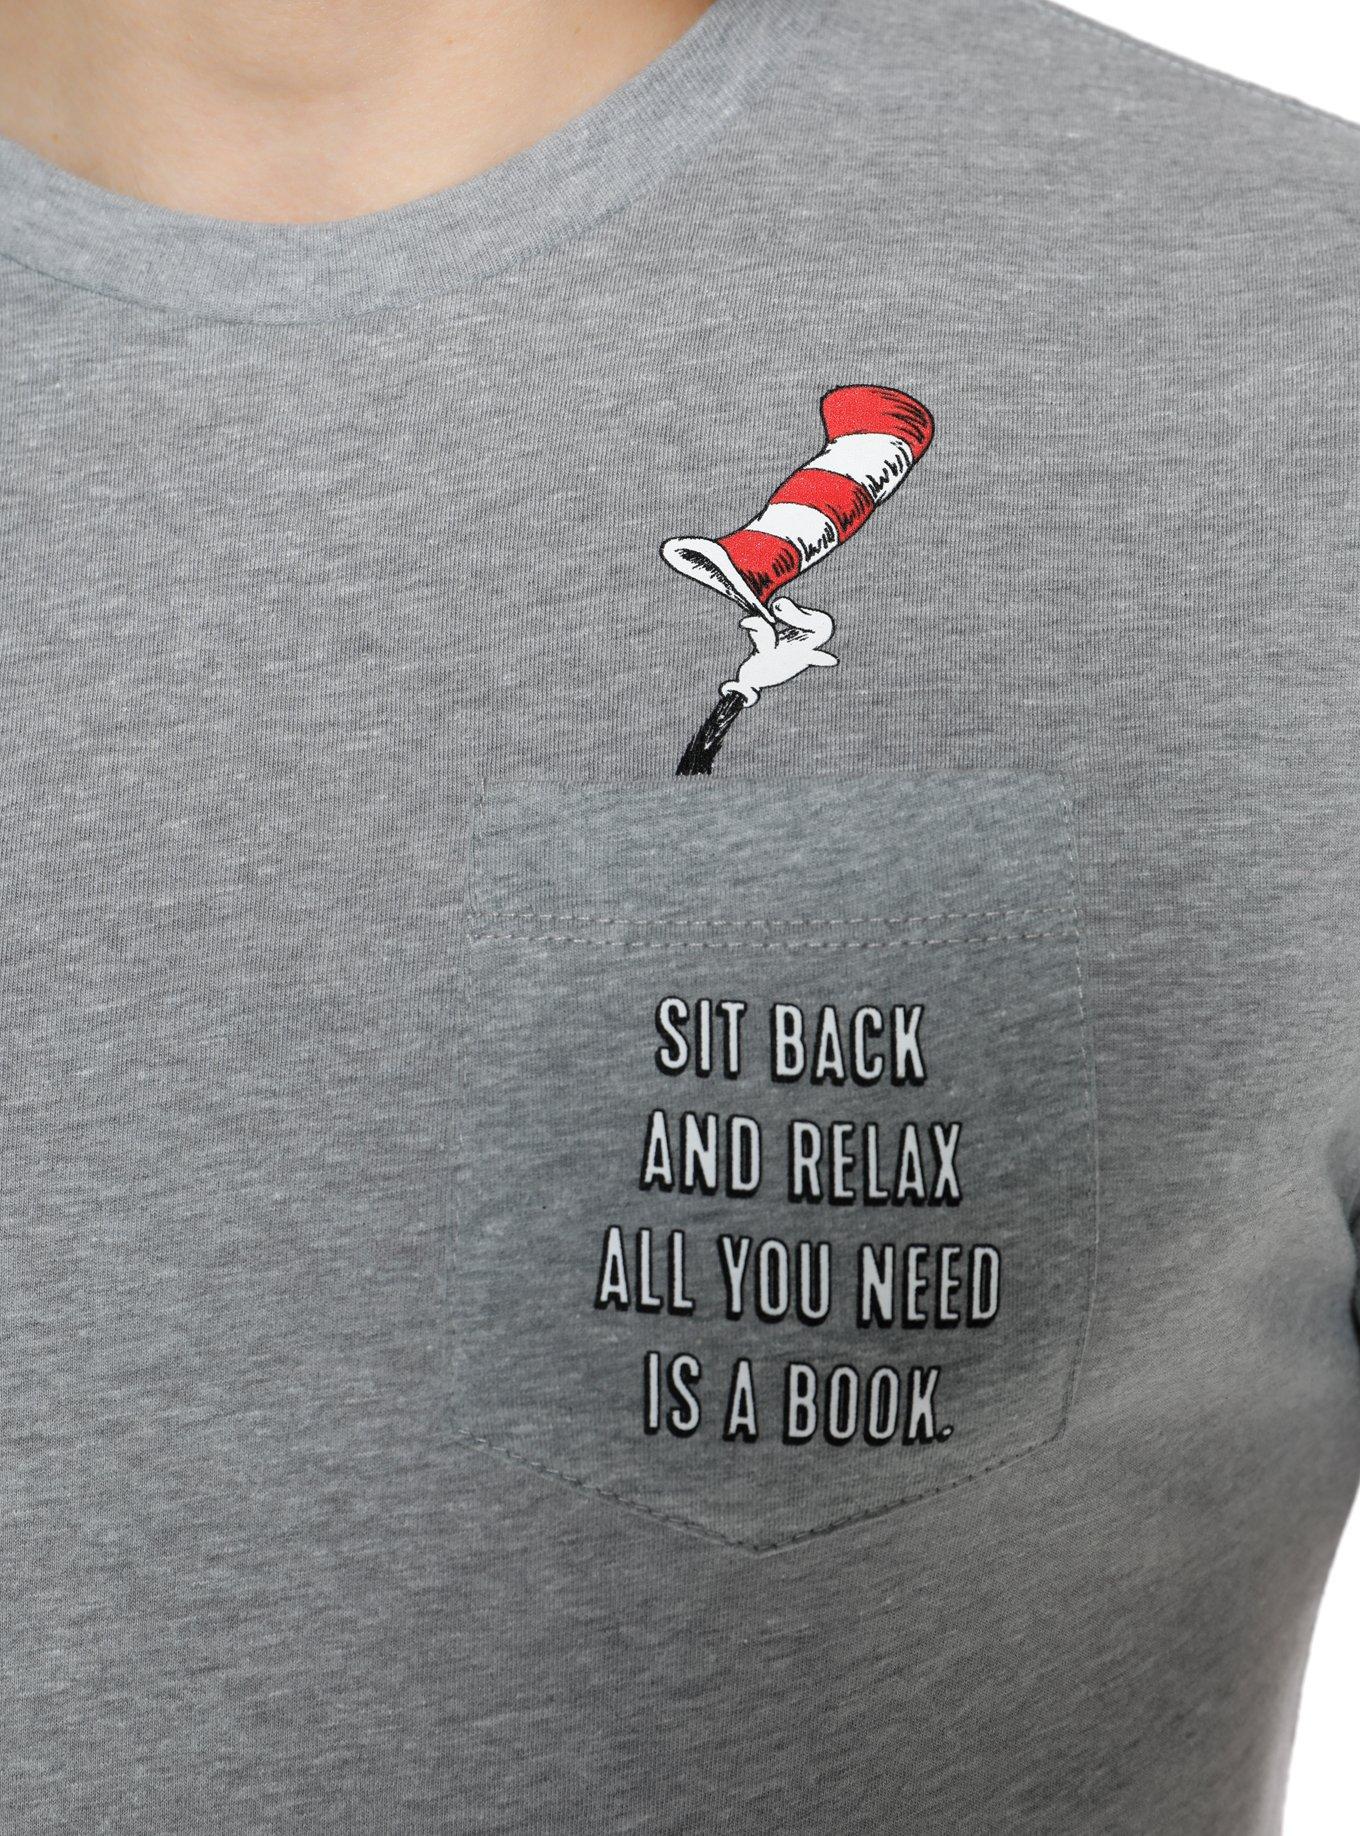 Dr. Seuss The Cat in the Hat Pocket T-Shirt, , alternate